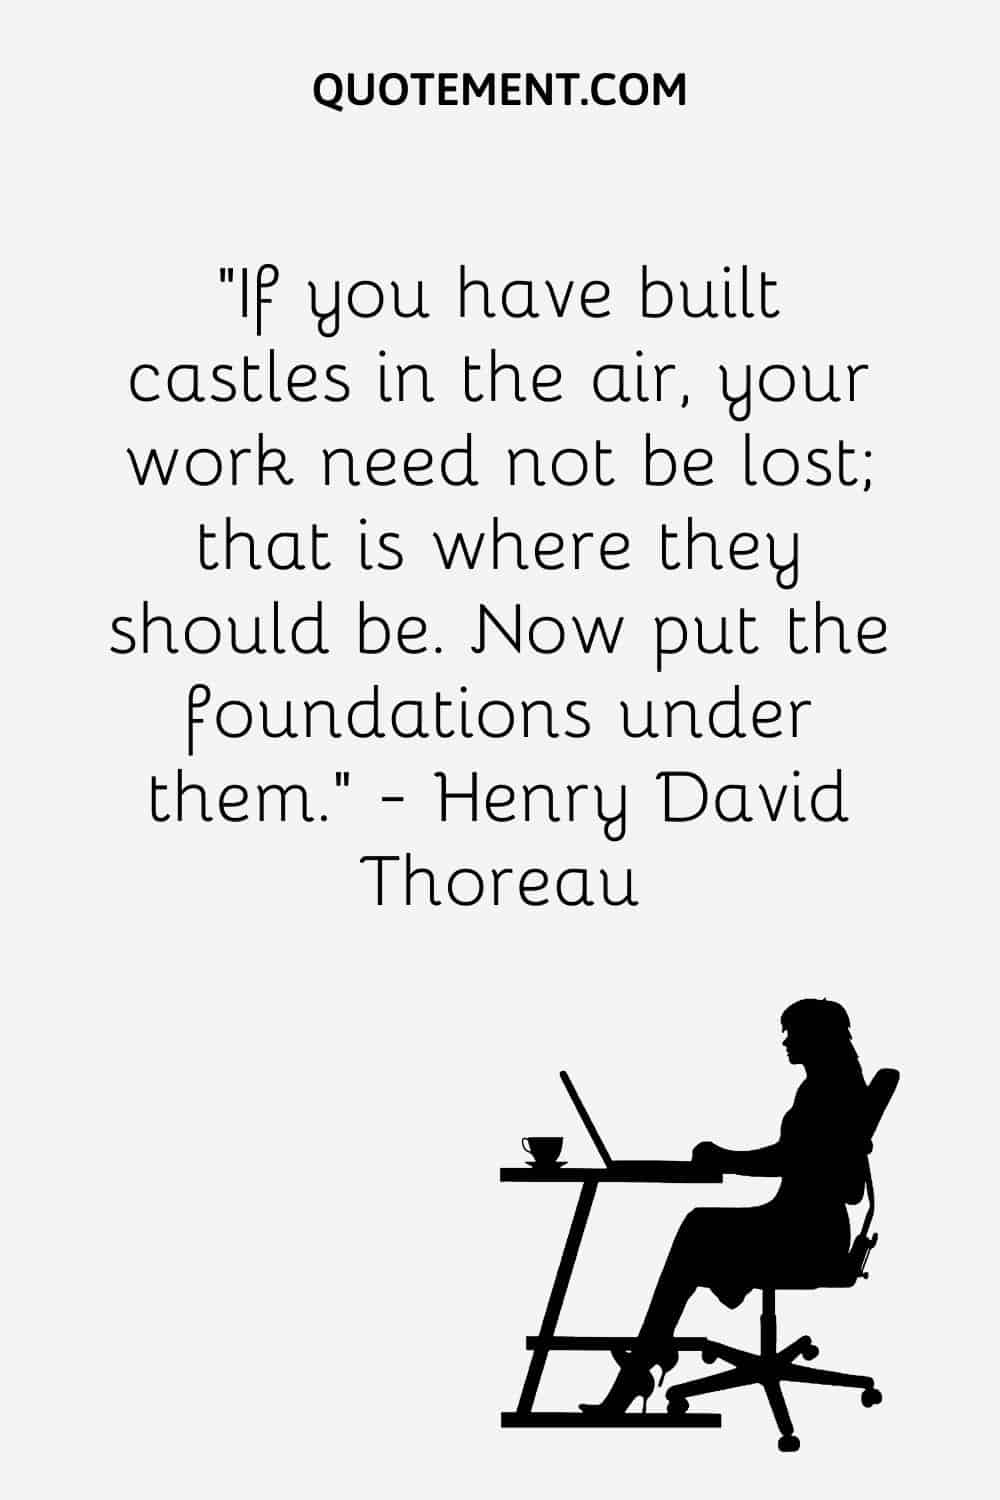 If you have built castles in the air, your work need not be lost; that is where they should be.